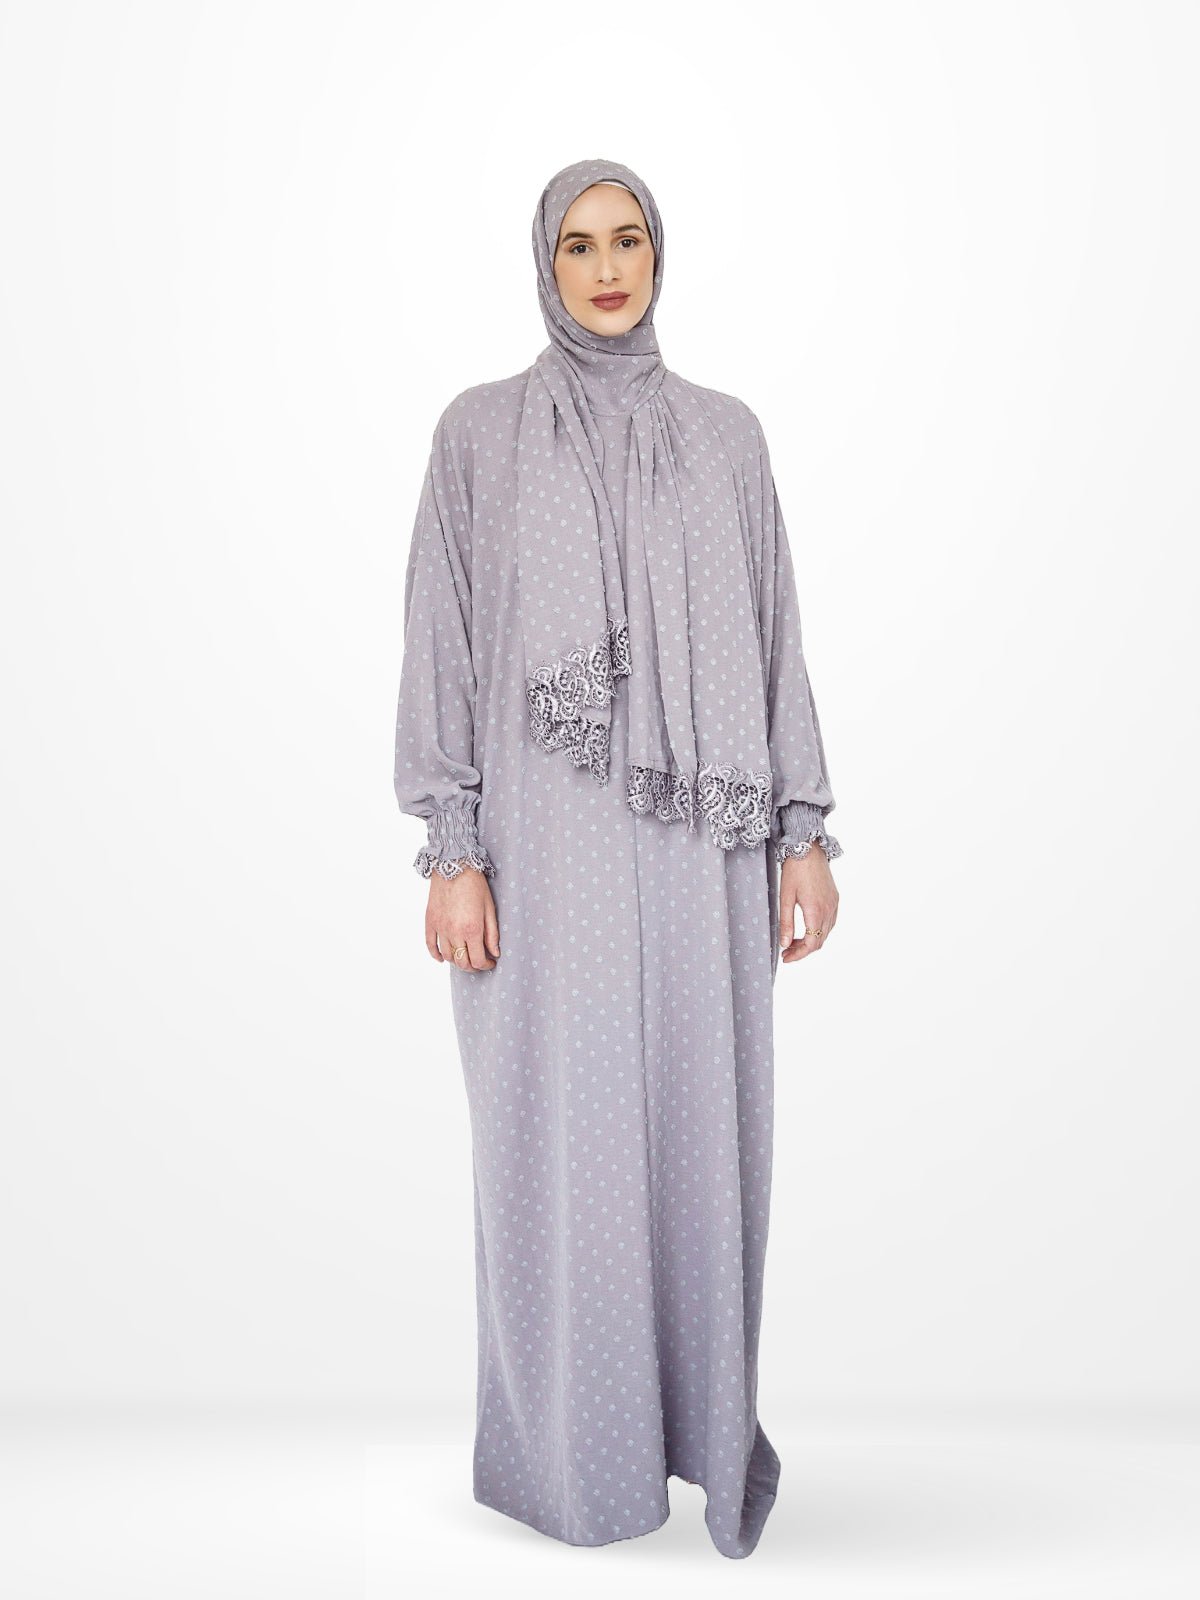 One-Piece Prayer Dress & Abaya with attached Hijab - Dotted - Modest Essence